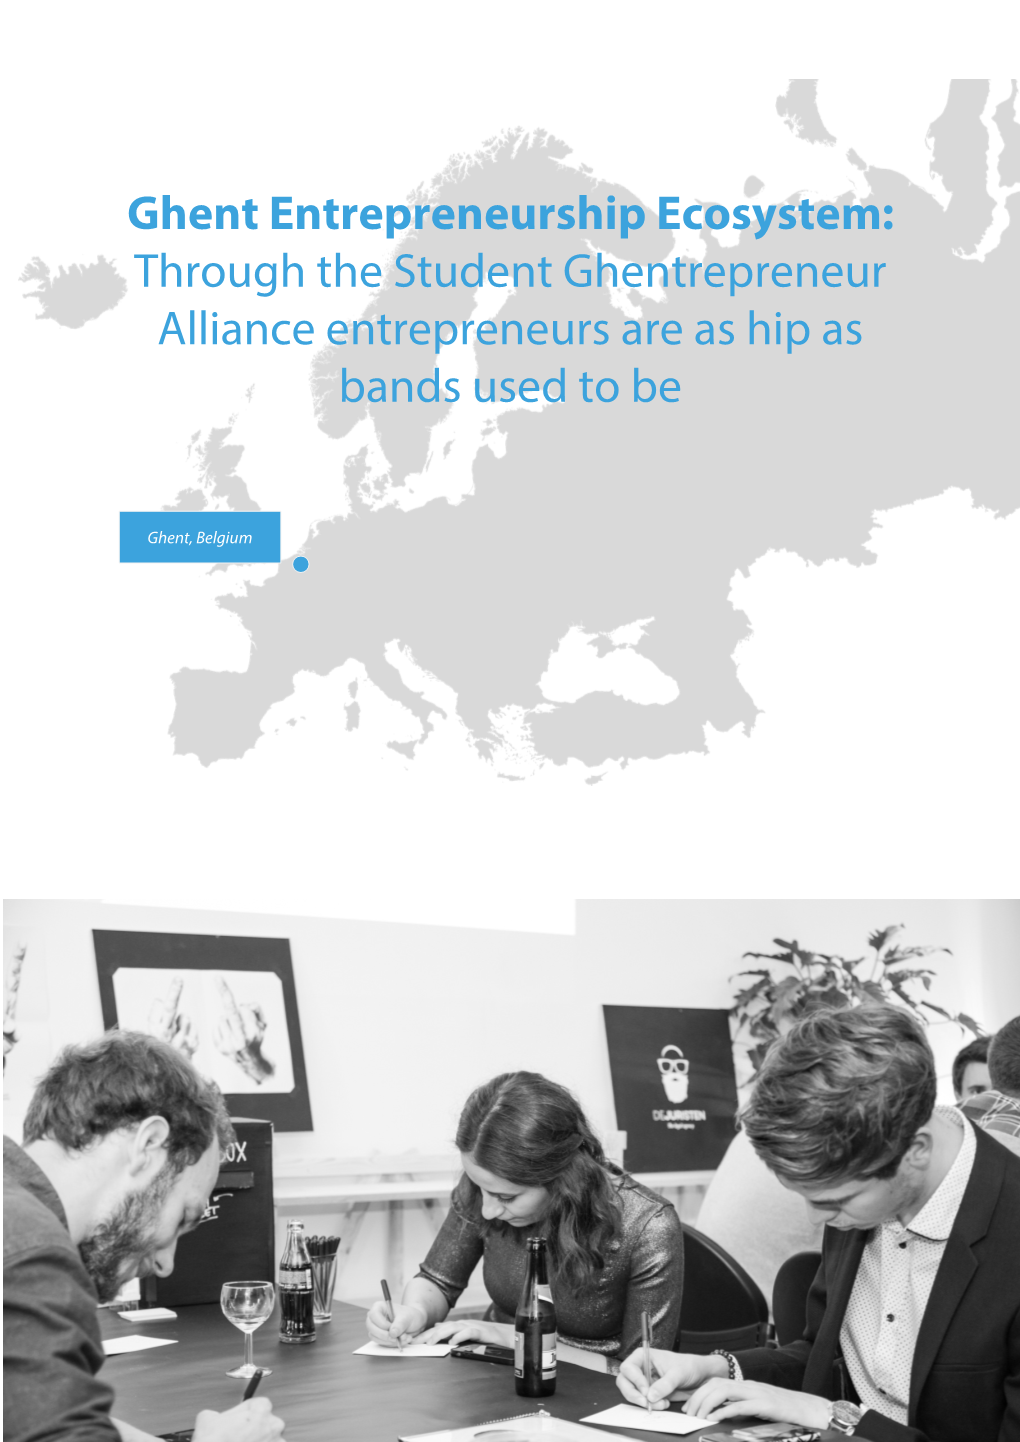 Ghent Entrepreneurship Ecosystem: Through the Student Ghentrepreneur Alliance Entrepreneurs Are As Hip As Bands Used to Be